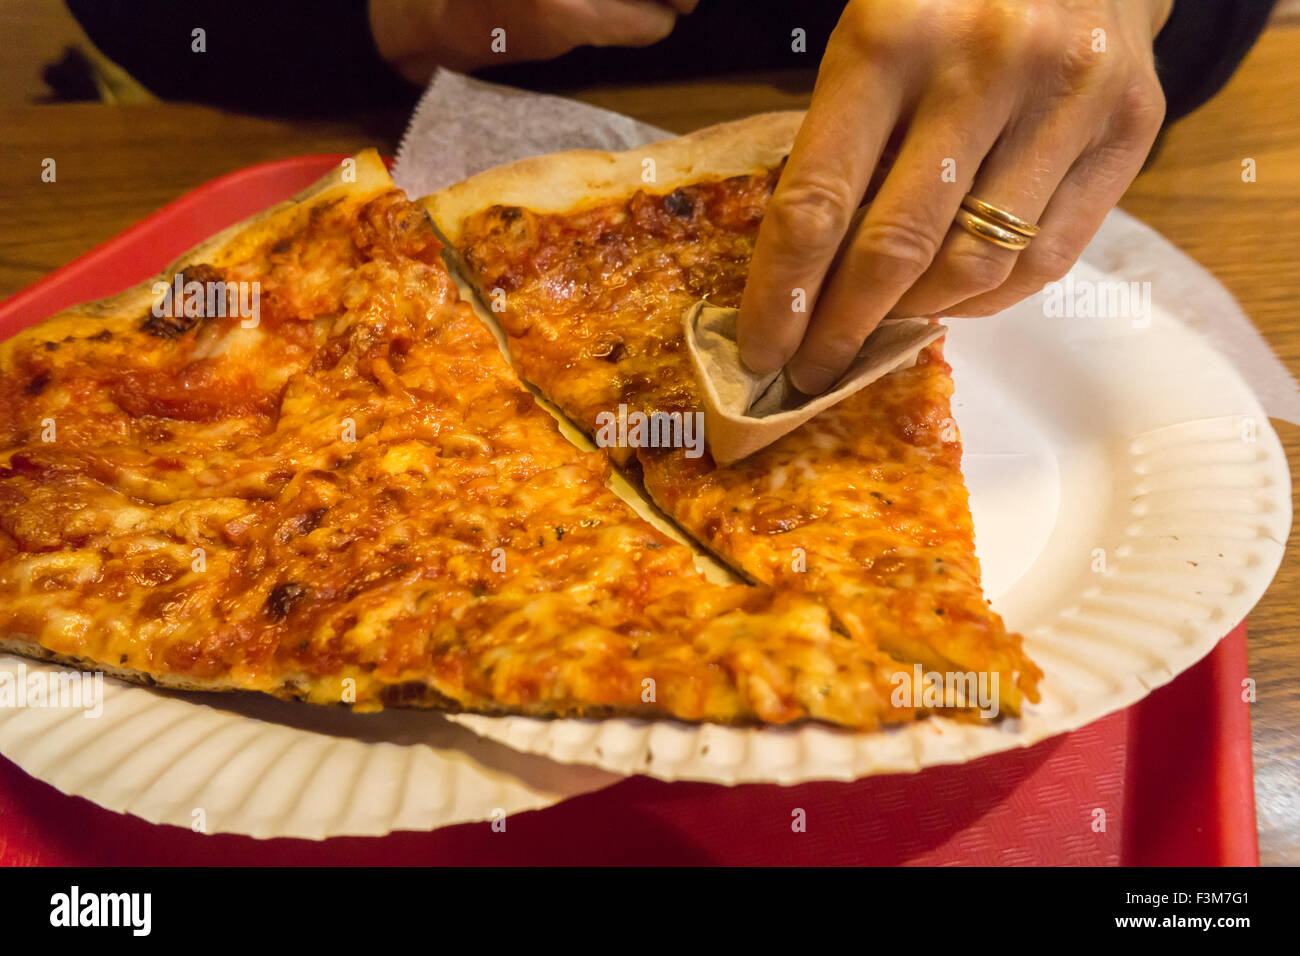 A hungry consumer dabs her slice of pizza with a napkin to absorb the excess grease in a pizzeria in New York on Friday, October 2, 2015. A recent study reveals that degreasing your slice removes up to 76 calories and 4 1/2 grams of fat, or up to two pounds on your waistline every year. The average American eats 23 pounds of pizza yearly. (© Richard B. Levine) Stock Photo